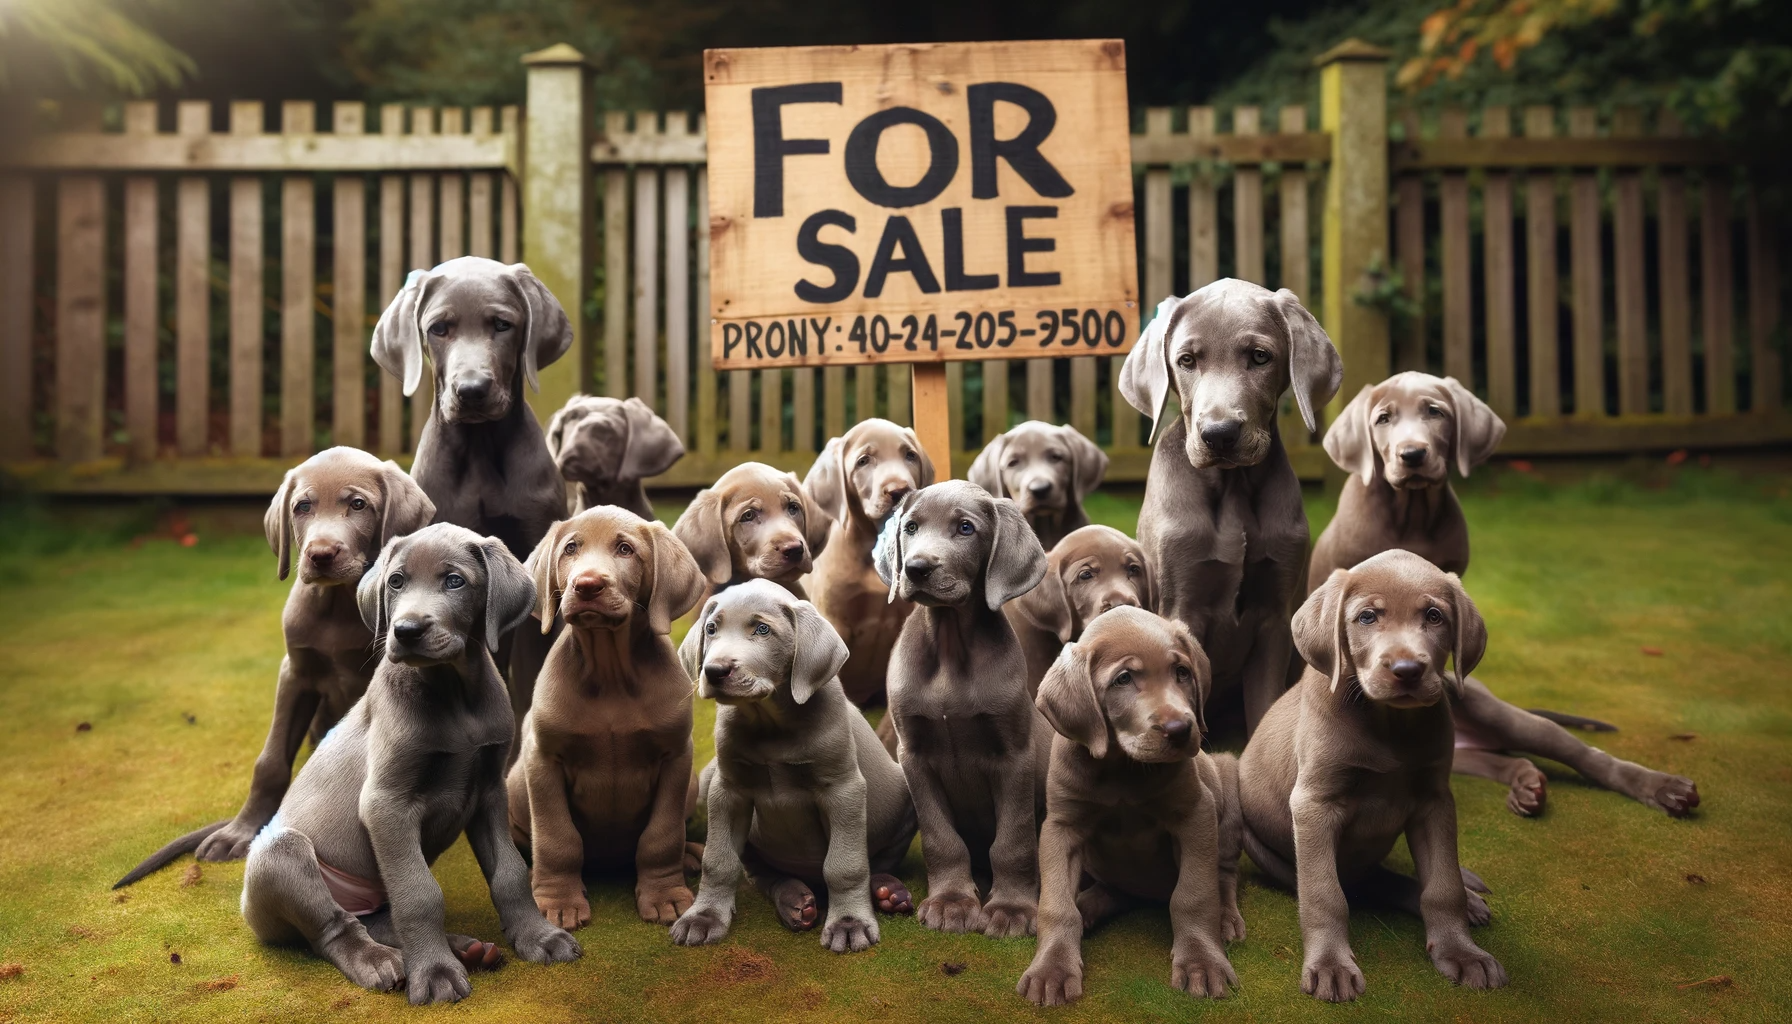 Labmaraner puppies with a For Sale sign